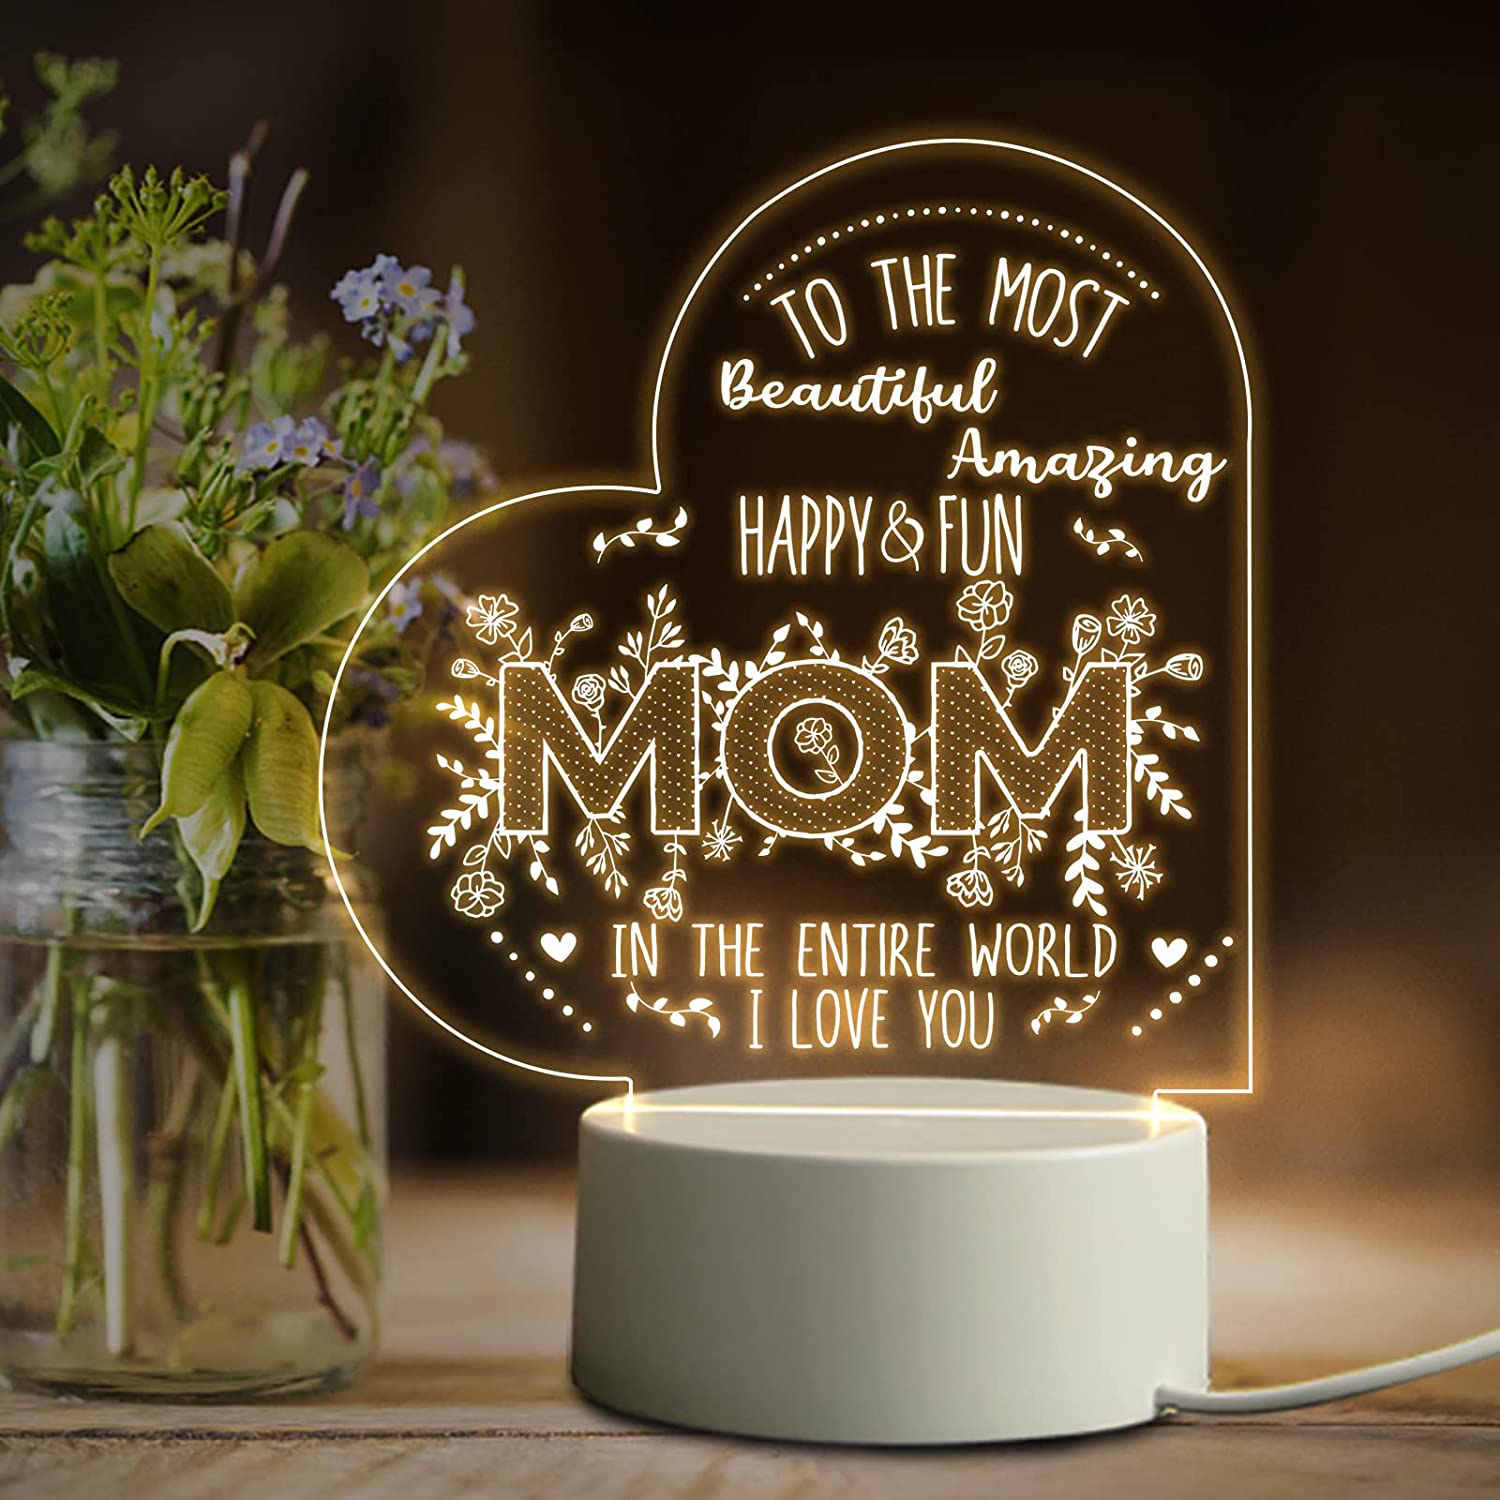 Gifts for Mom Personalized - Custom Night Light with Picture Text, Mom  Gifts, Mother Gifts, Mothers Day Gifts from Daughter Son Husband, Gifts for